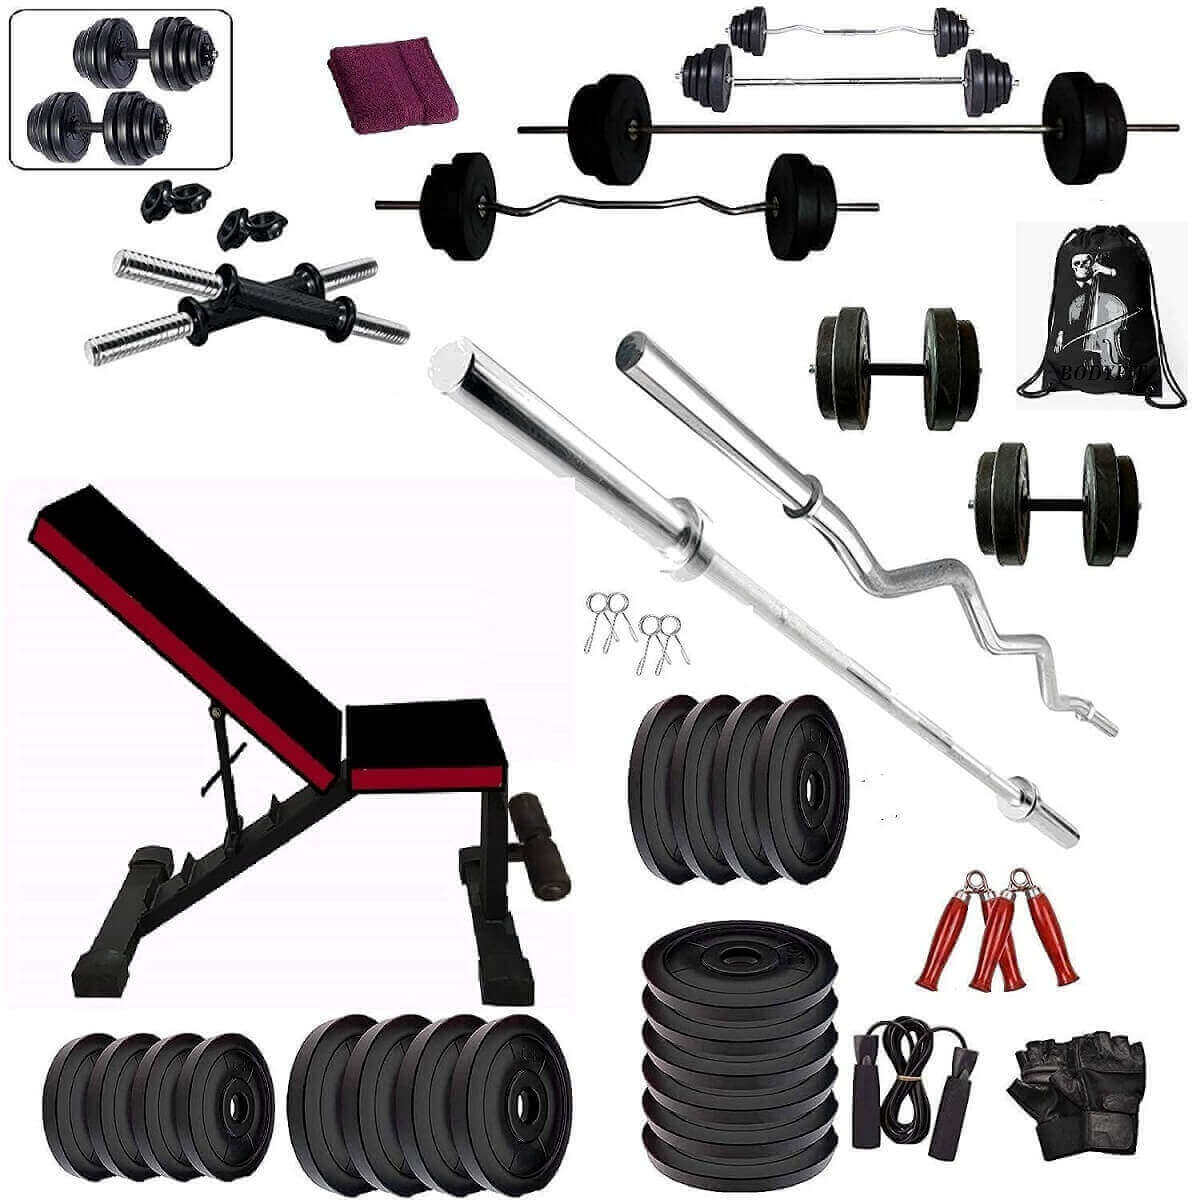 https://www.sportswing.in/wp-content/uploads/2021/12/Bodyfit-Home-Gym-Set-Home-Gym-Equipment-Combo3-Ft-Curl-5-Ft-Plain-Rod-n-1-Pair-Dumbbell-Rods-Adjustable-Gym-Bench-Fitness-Bench-Home-Gym-Equipments-for-Men-Gym-Accessories-1-1-1.jpg